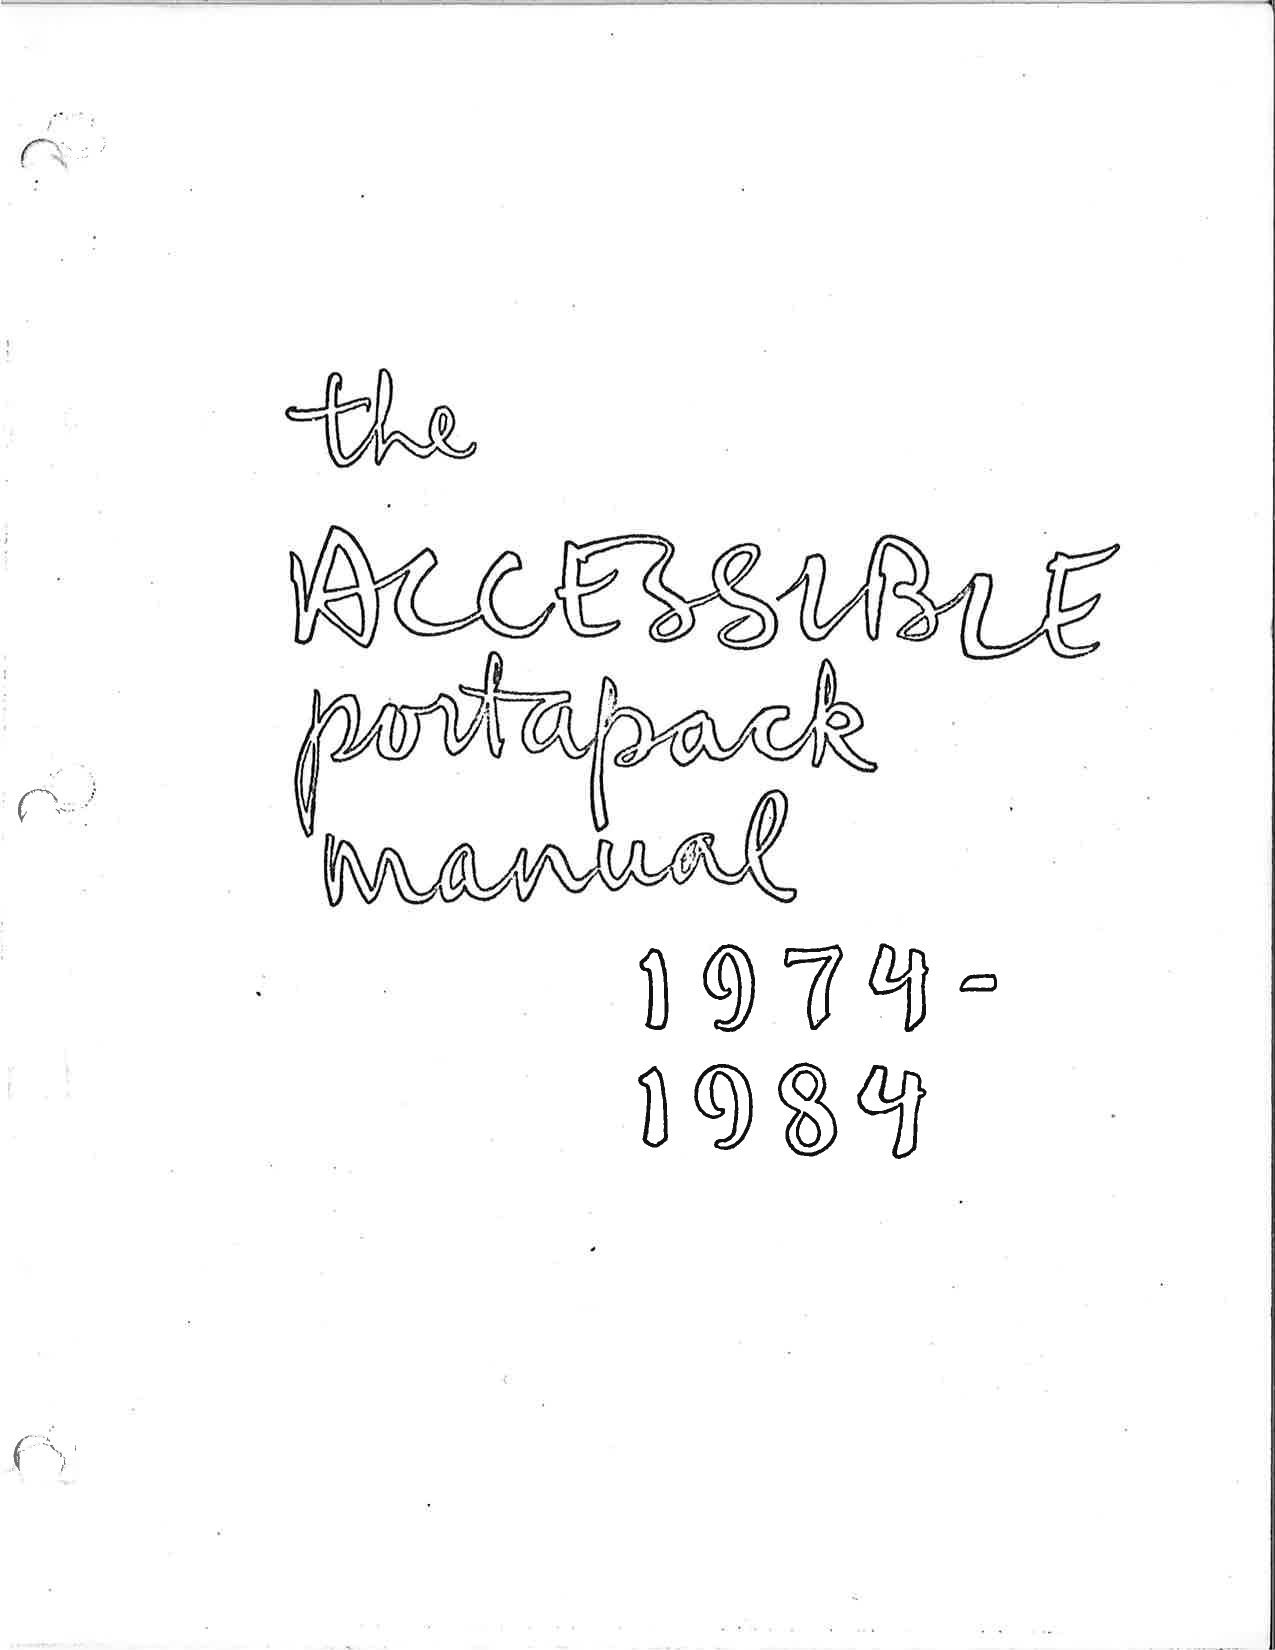 Cover page of a Portapak user manual. The page is entirely blank except for the handwritten title, “The Accessible Portapak Manual 1974-1984.”